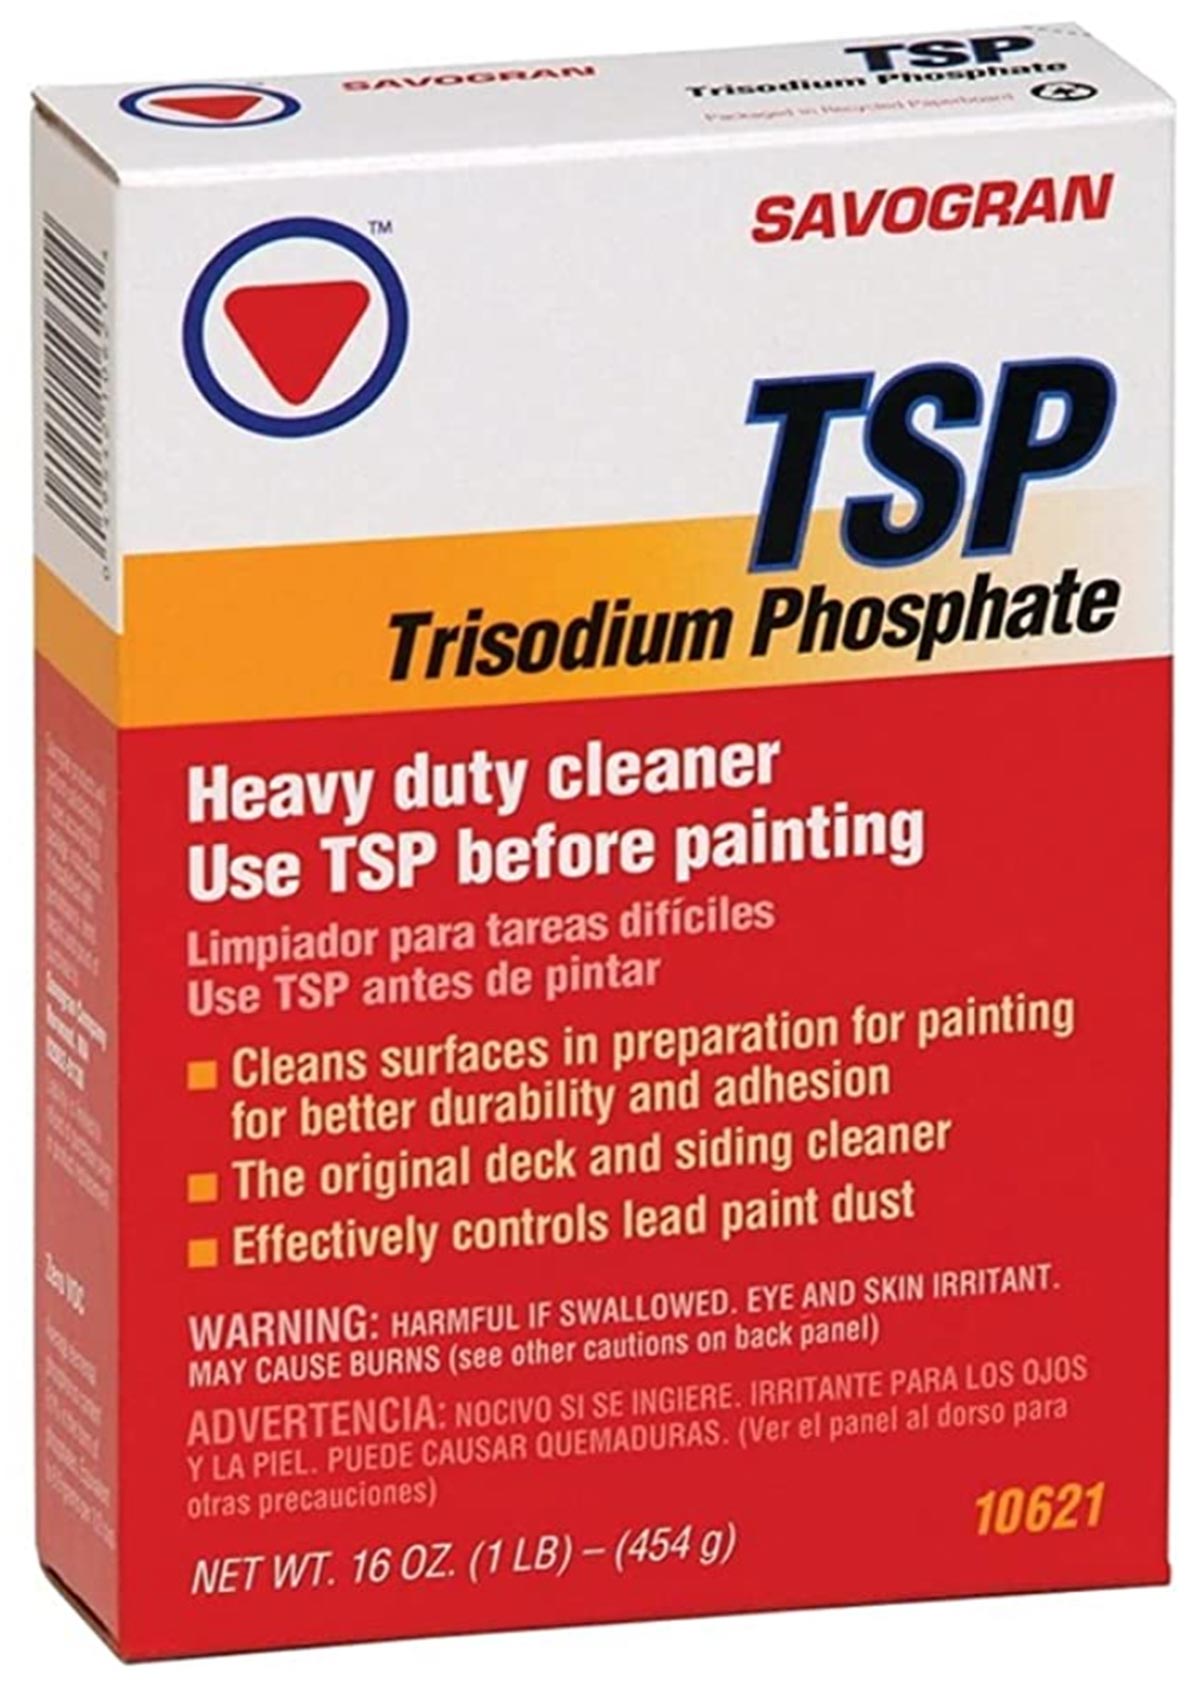 close view of a box of TSP (Trisodium Phosphate) all-purpose heavy-duty cleaner mixed